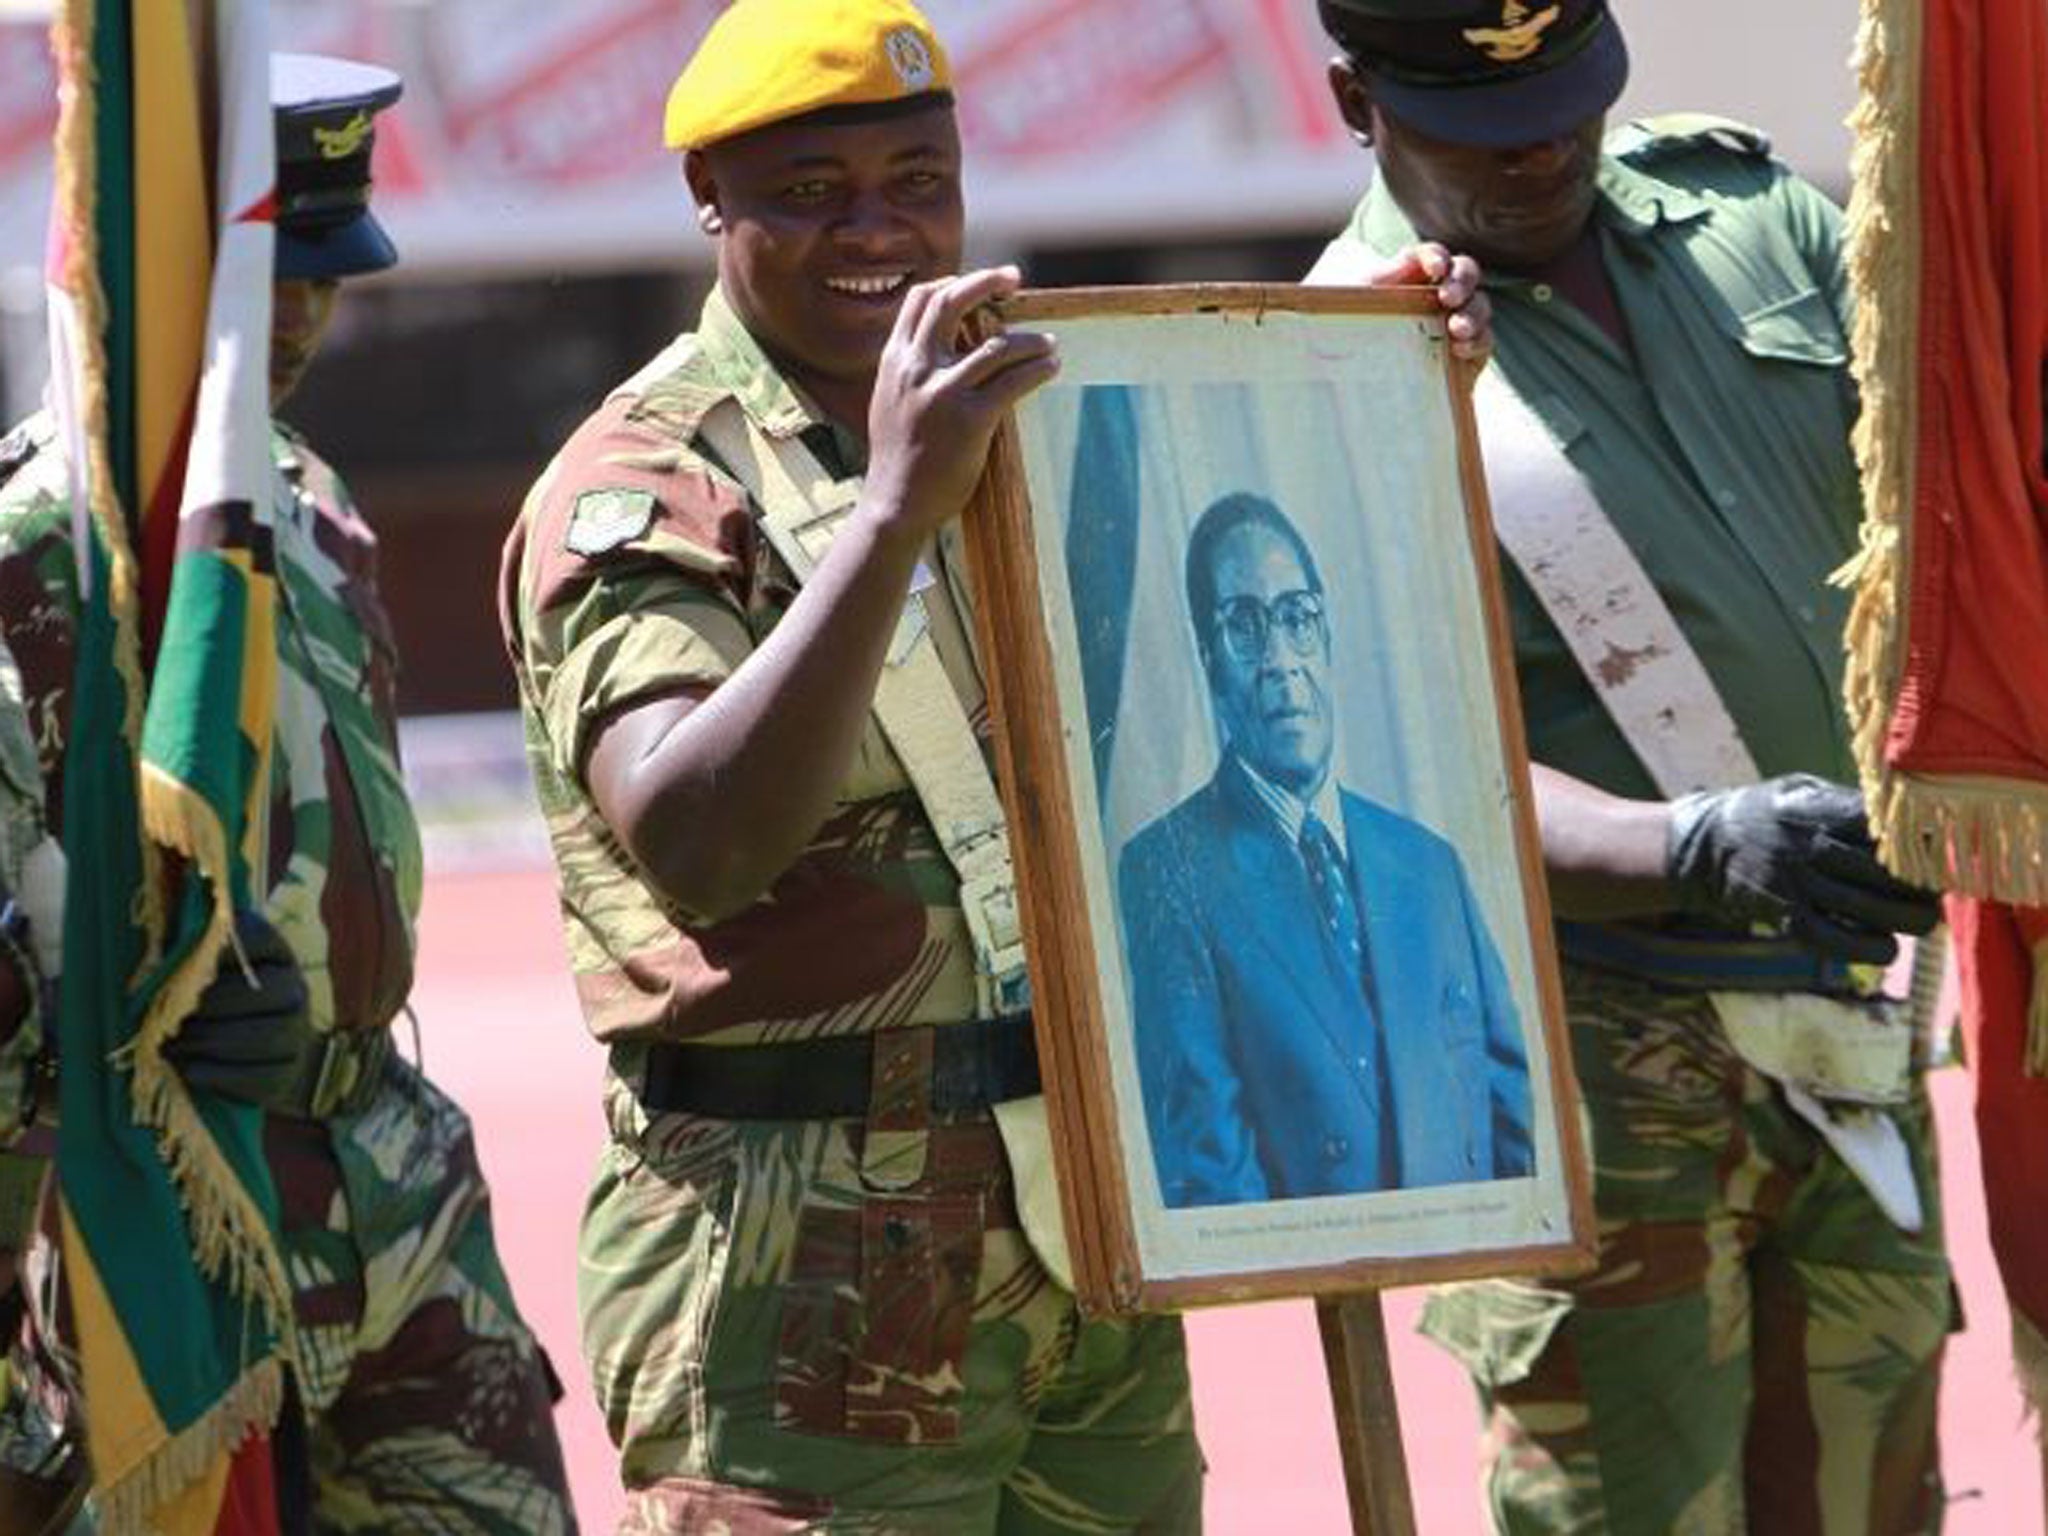 A soldiers holds a portrait of Zimbabwean President elect, Robert Mugabe during rehearsals for his inauguration in Harare, Wednesday, Aug. 21, 2013. Mugabe is expected to be inaugurated Thursday after Movement For Democratic Change (MDC) President Morgan Tsvangirai's case was dismissed by the Constitutional Court